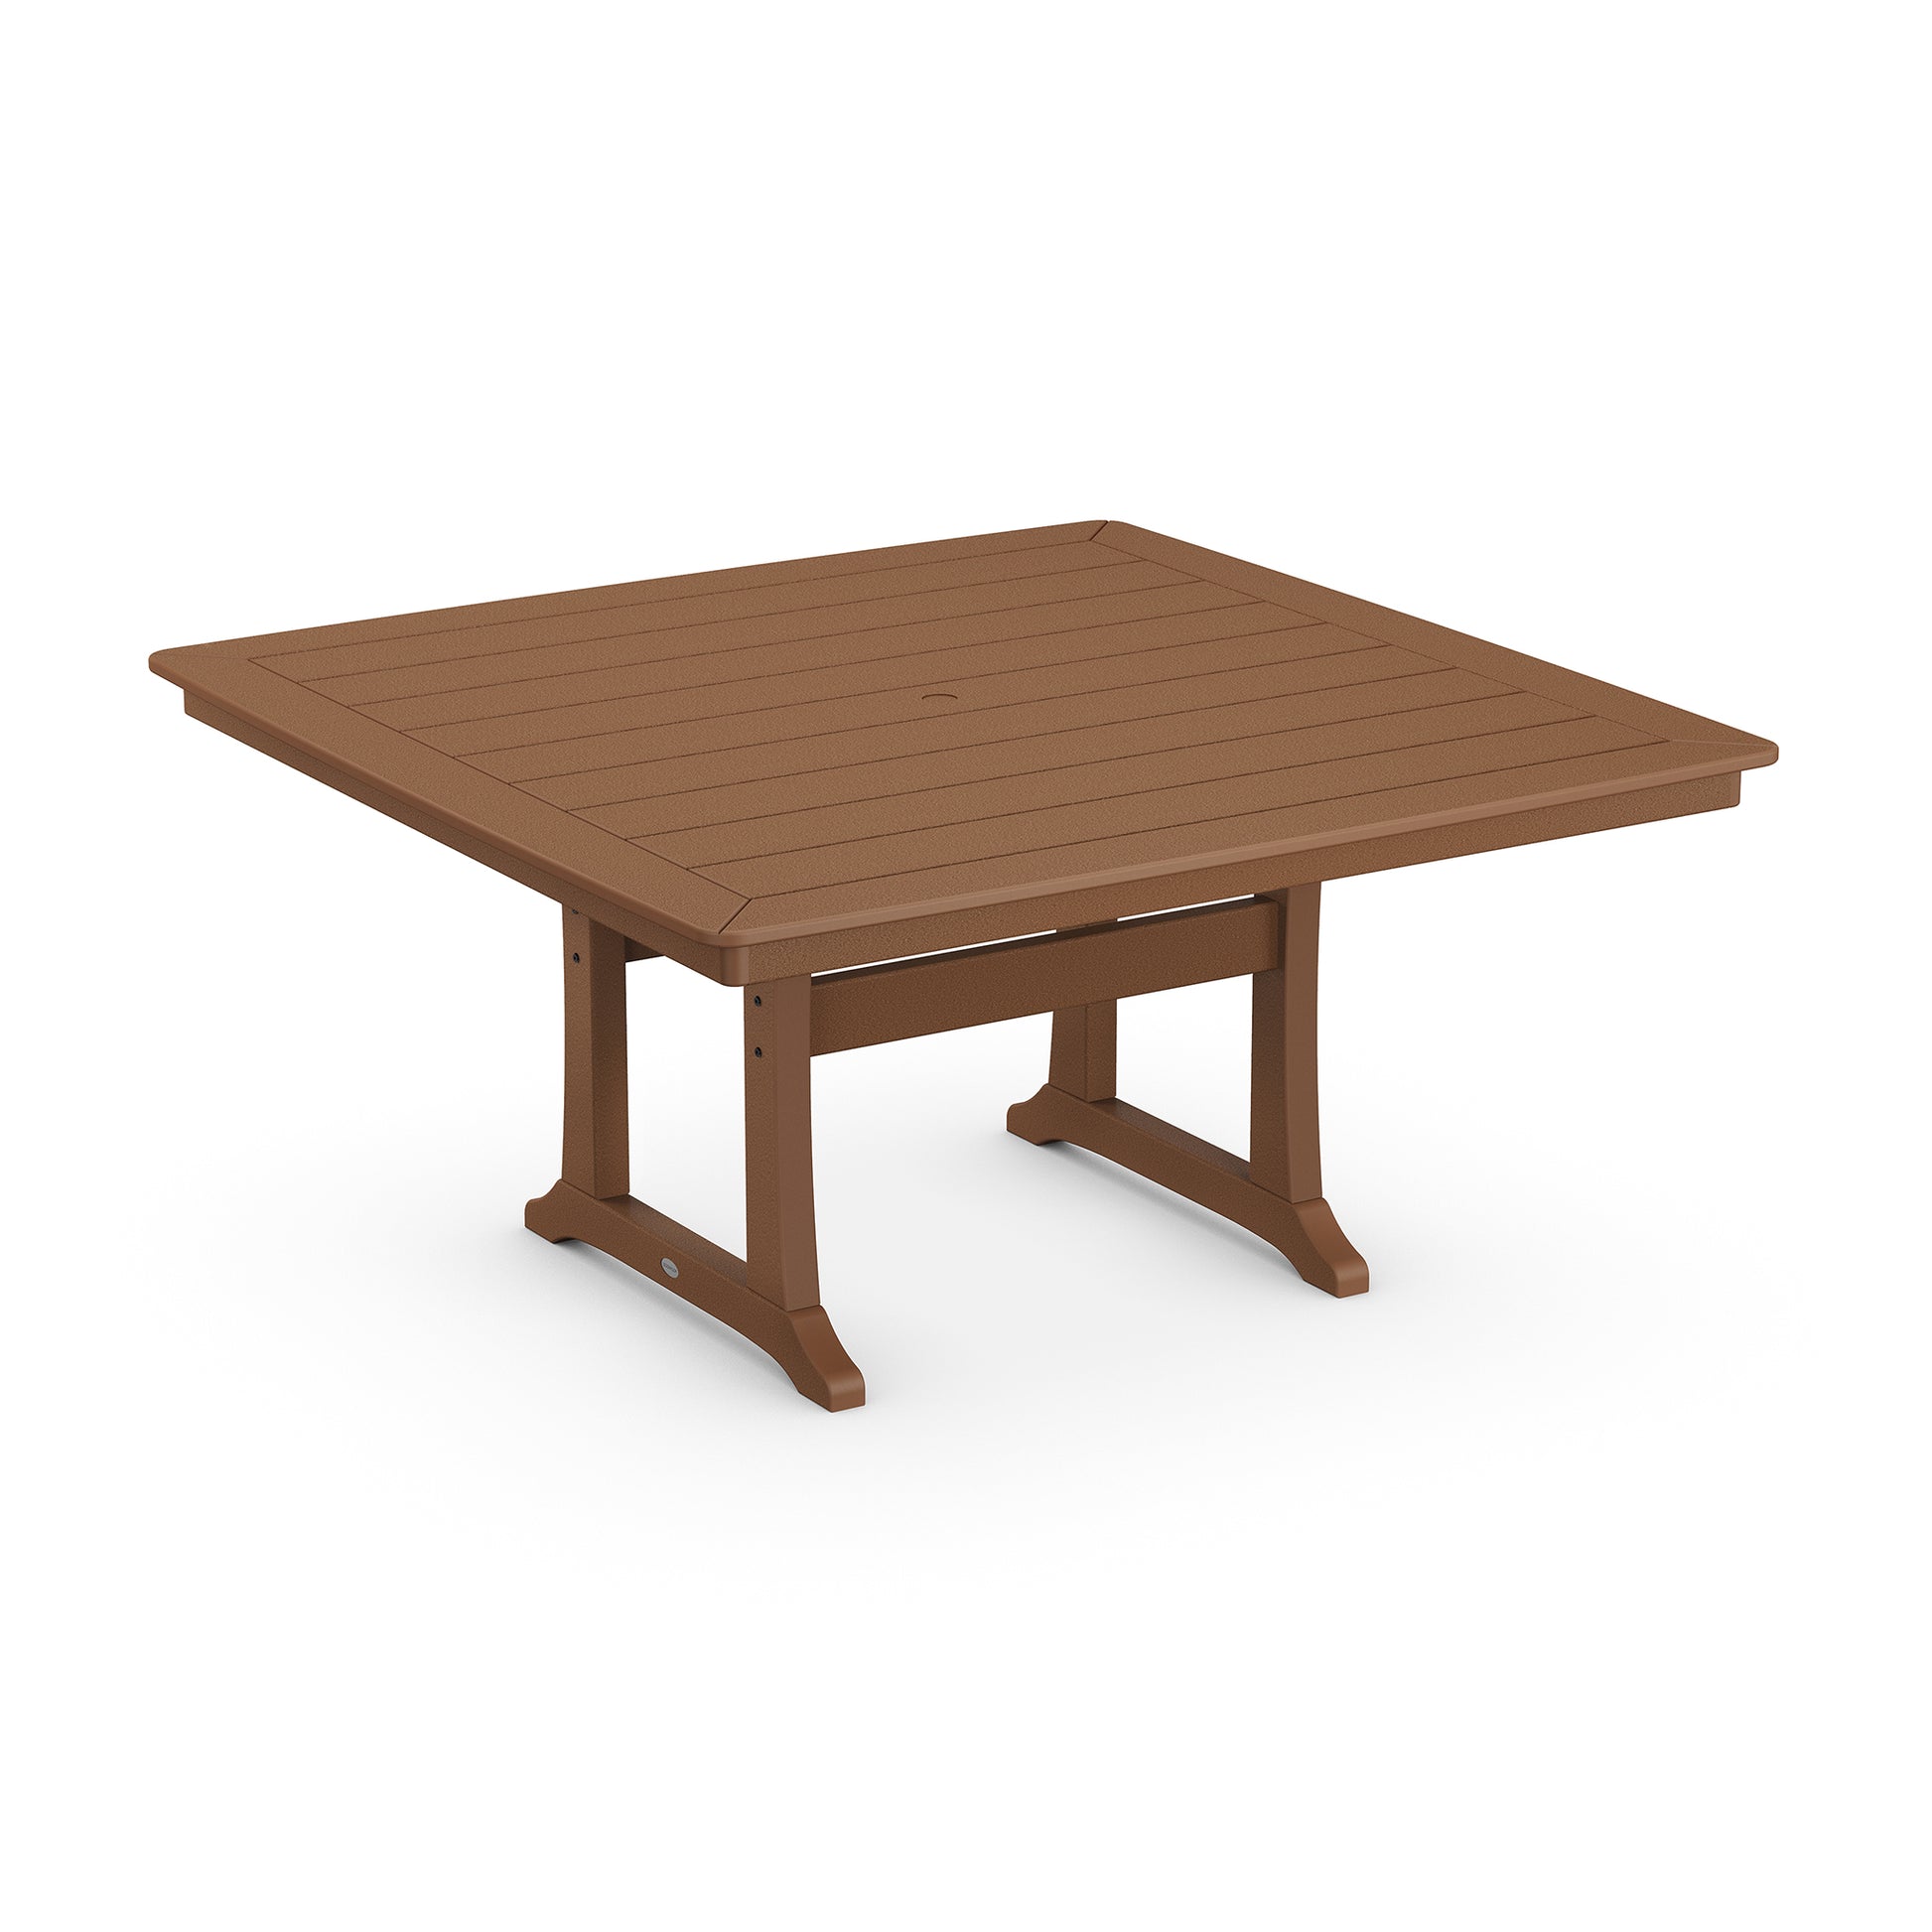 A square brown POLYWOOD® Nautical Trestle 59" Dining Table with slatted top and sturdy double pedestal base, isolated on a white background.